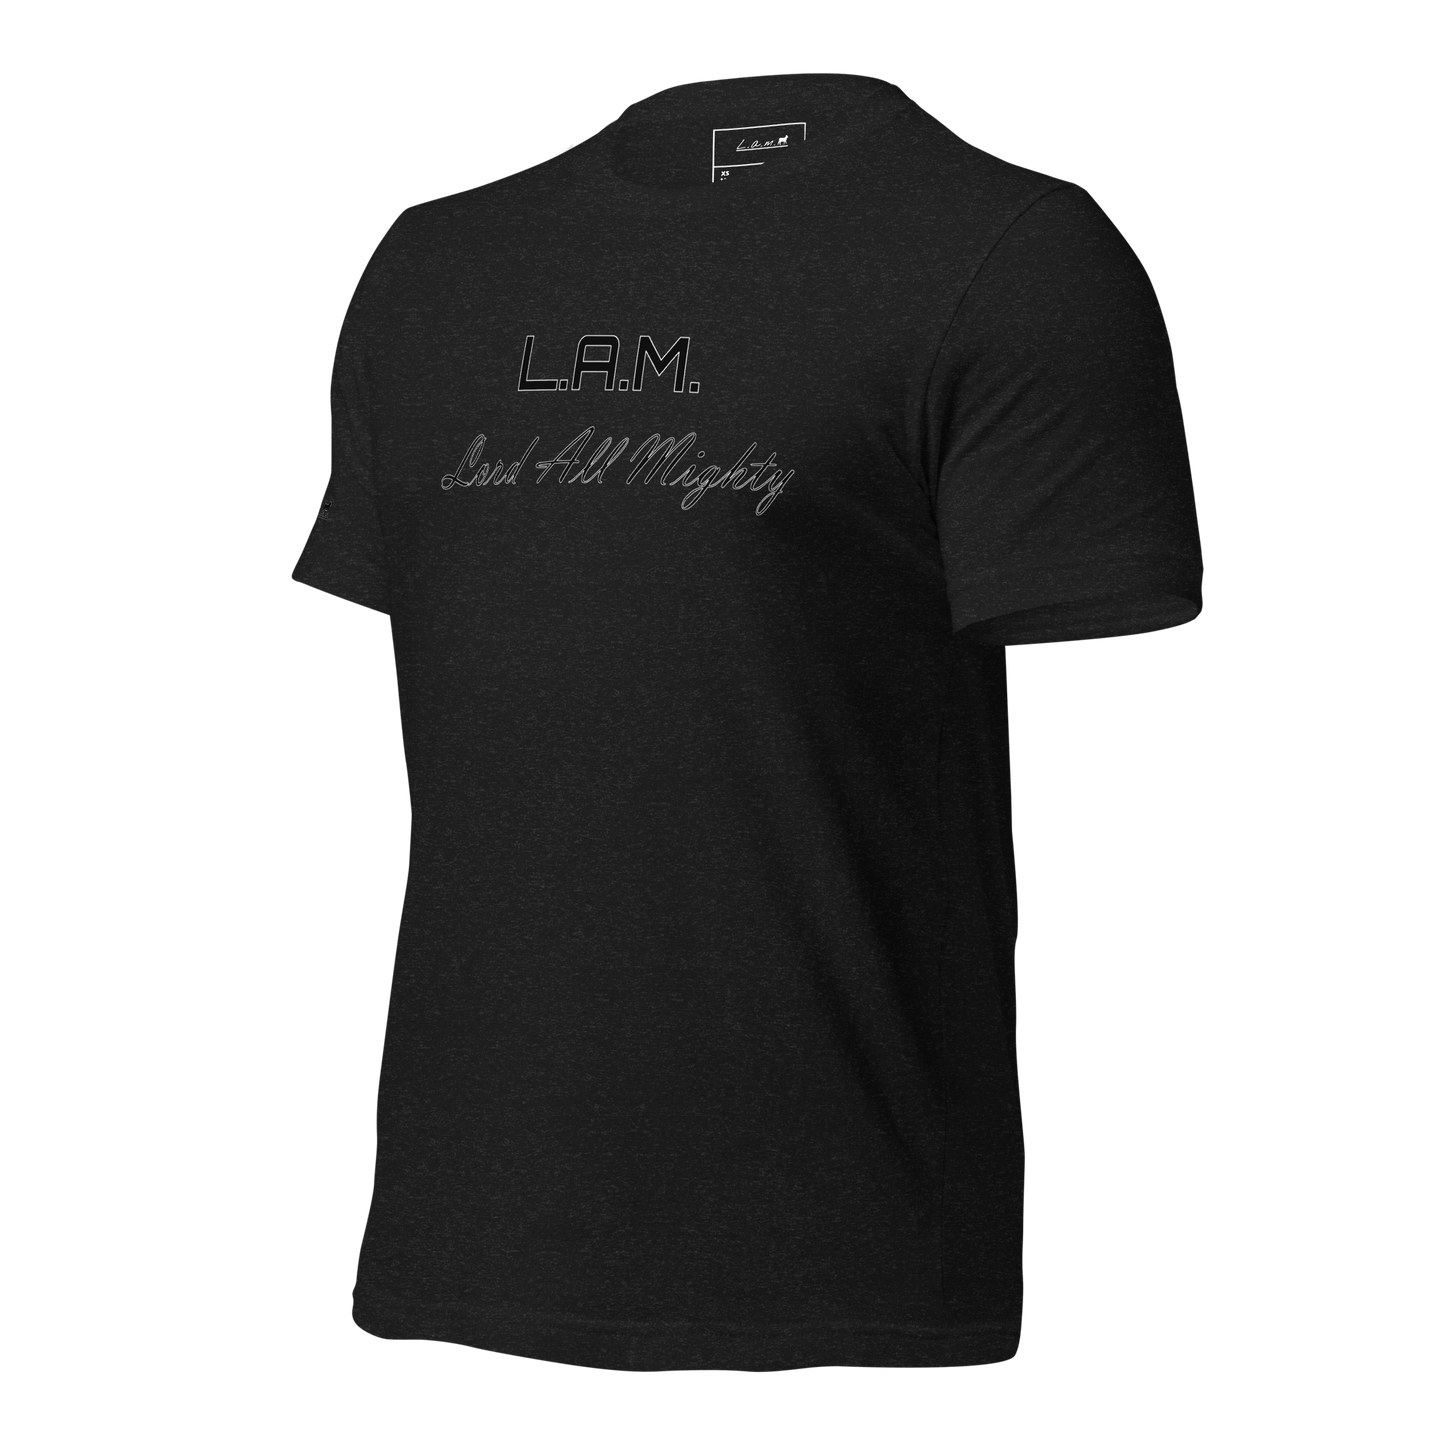 Unisex Lord All Mighty t-shirt